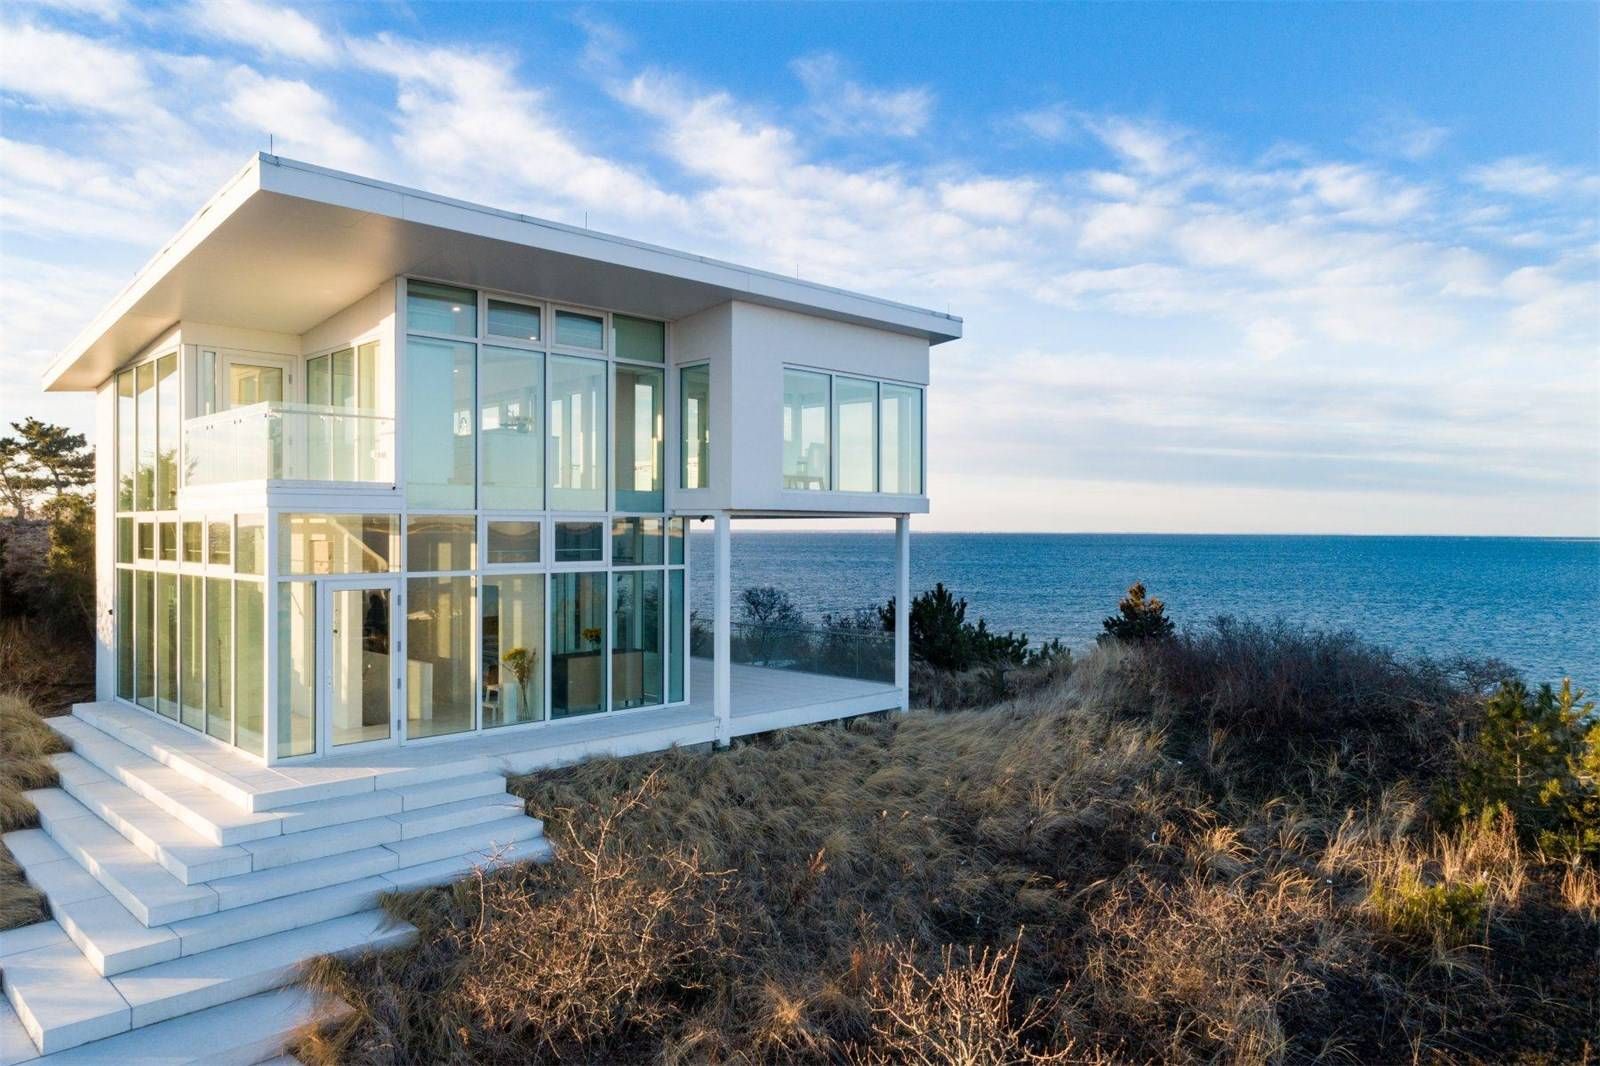 10 Stunning Modern Homes You Can Move Into Today